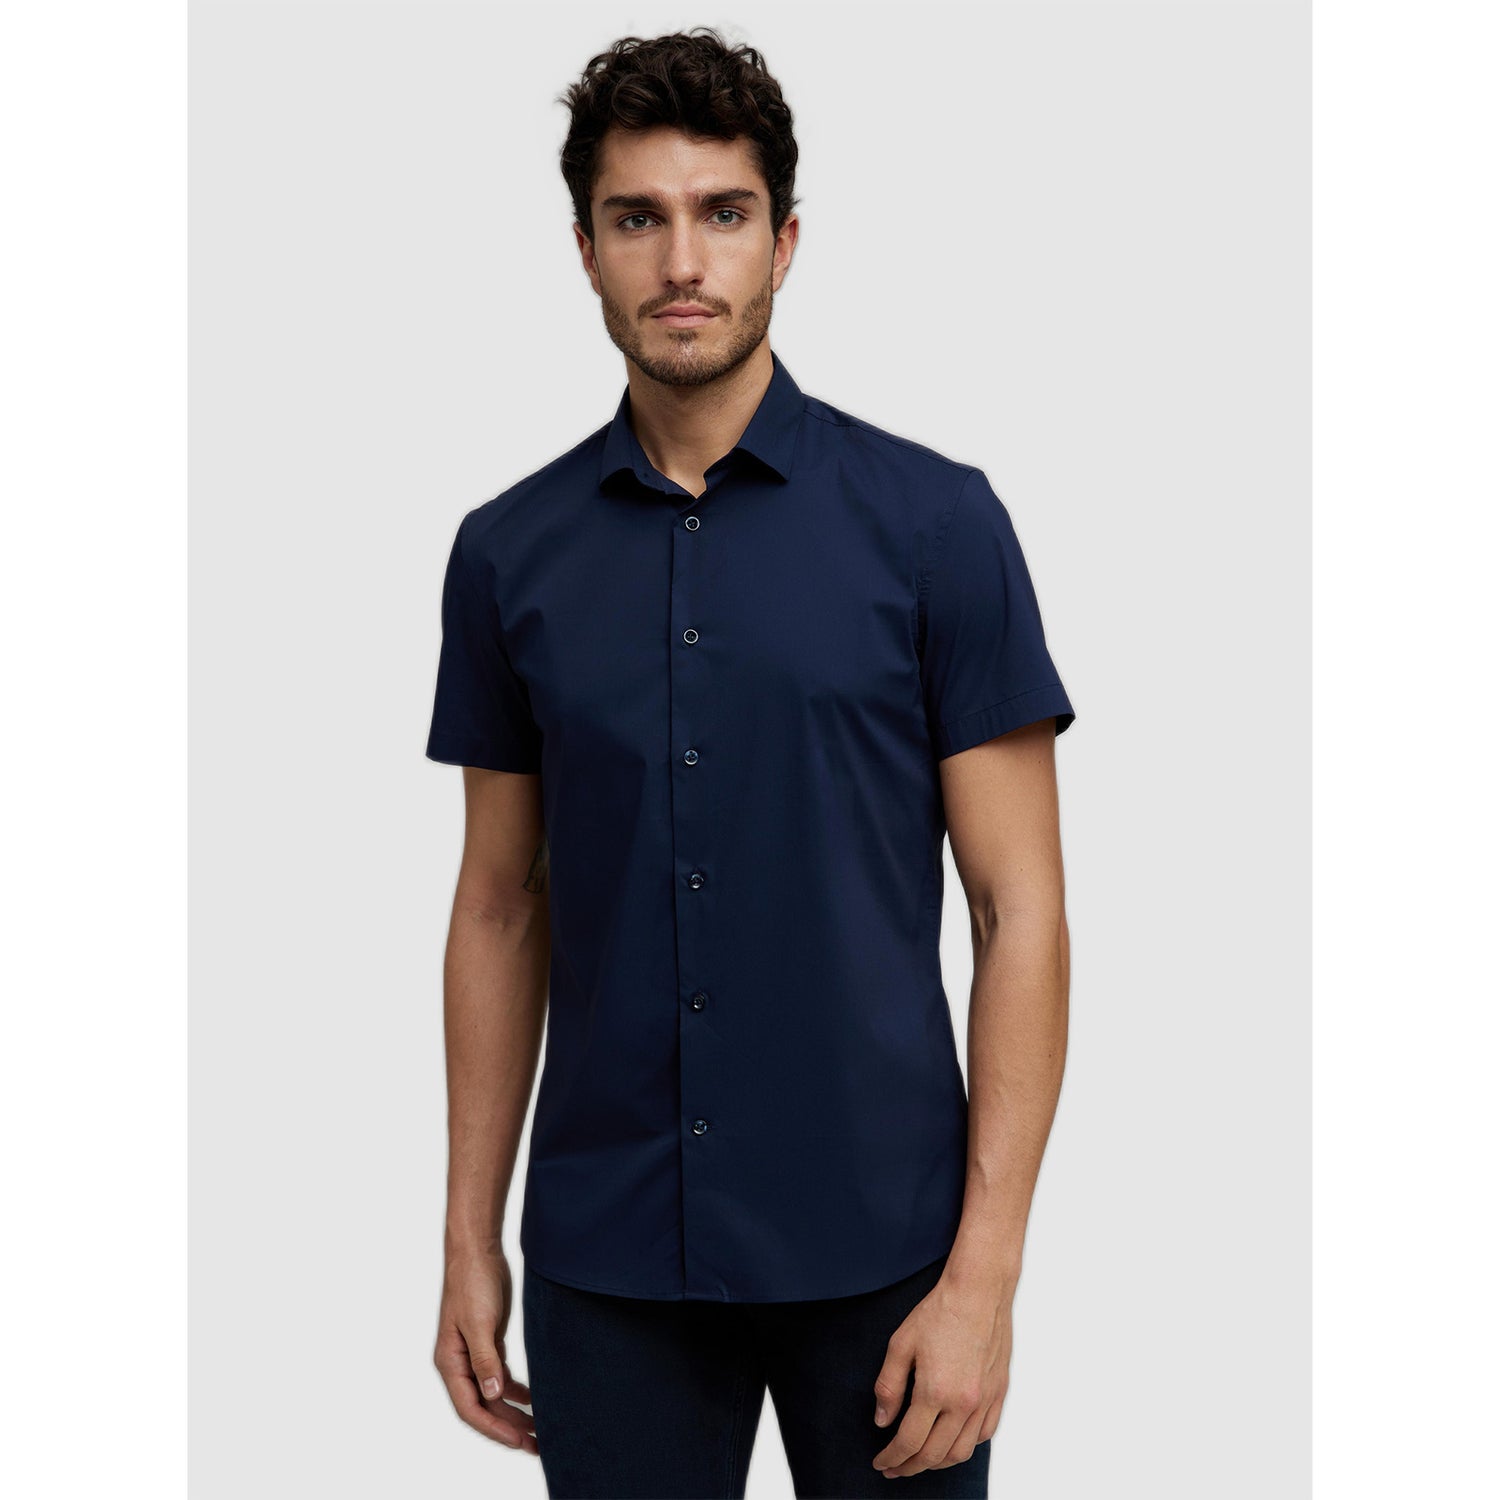 Navy Blue Solid Cotton Straight Slim Fit Casual Shirt (CASLIM)